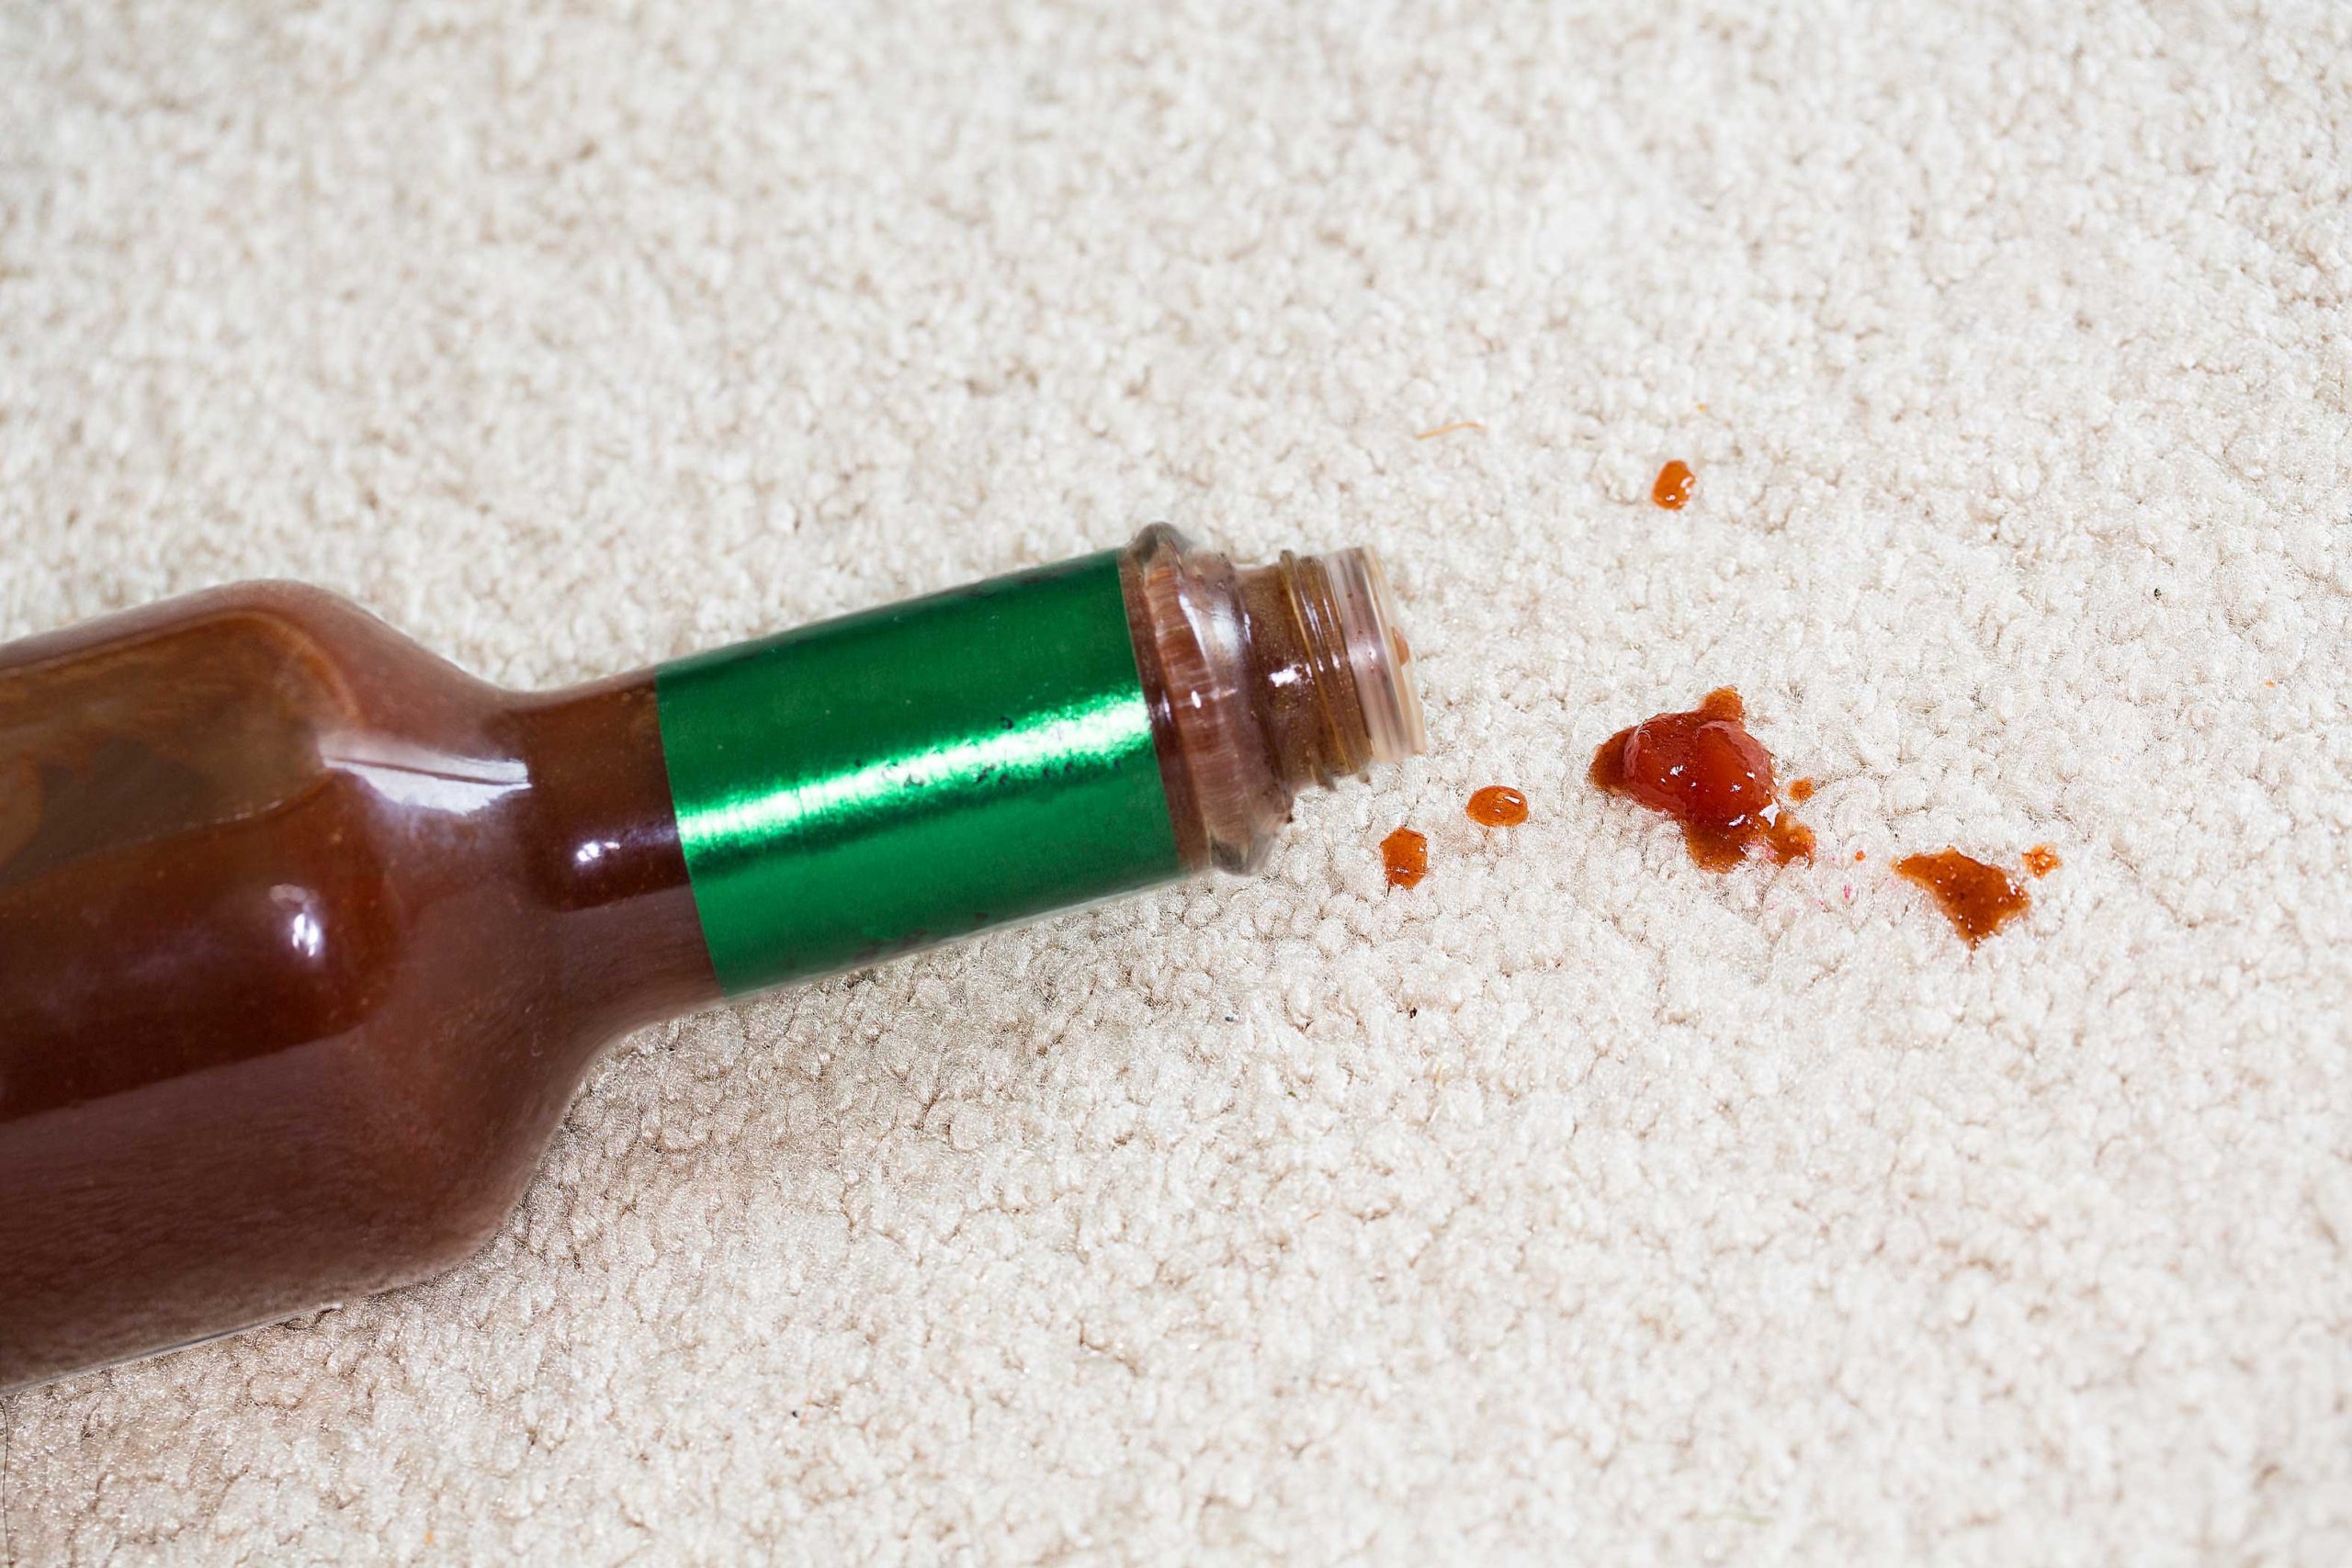 How to Get Hot Sauce Out of Carpet (with Pictures)